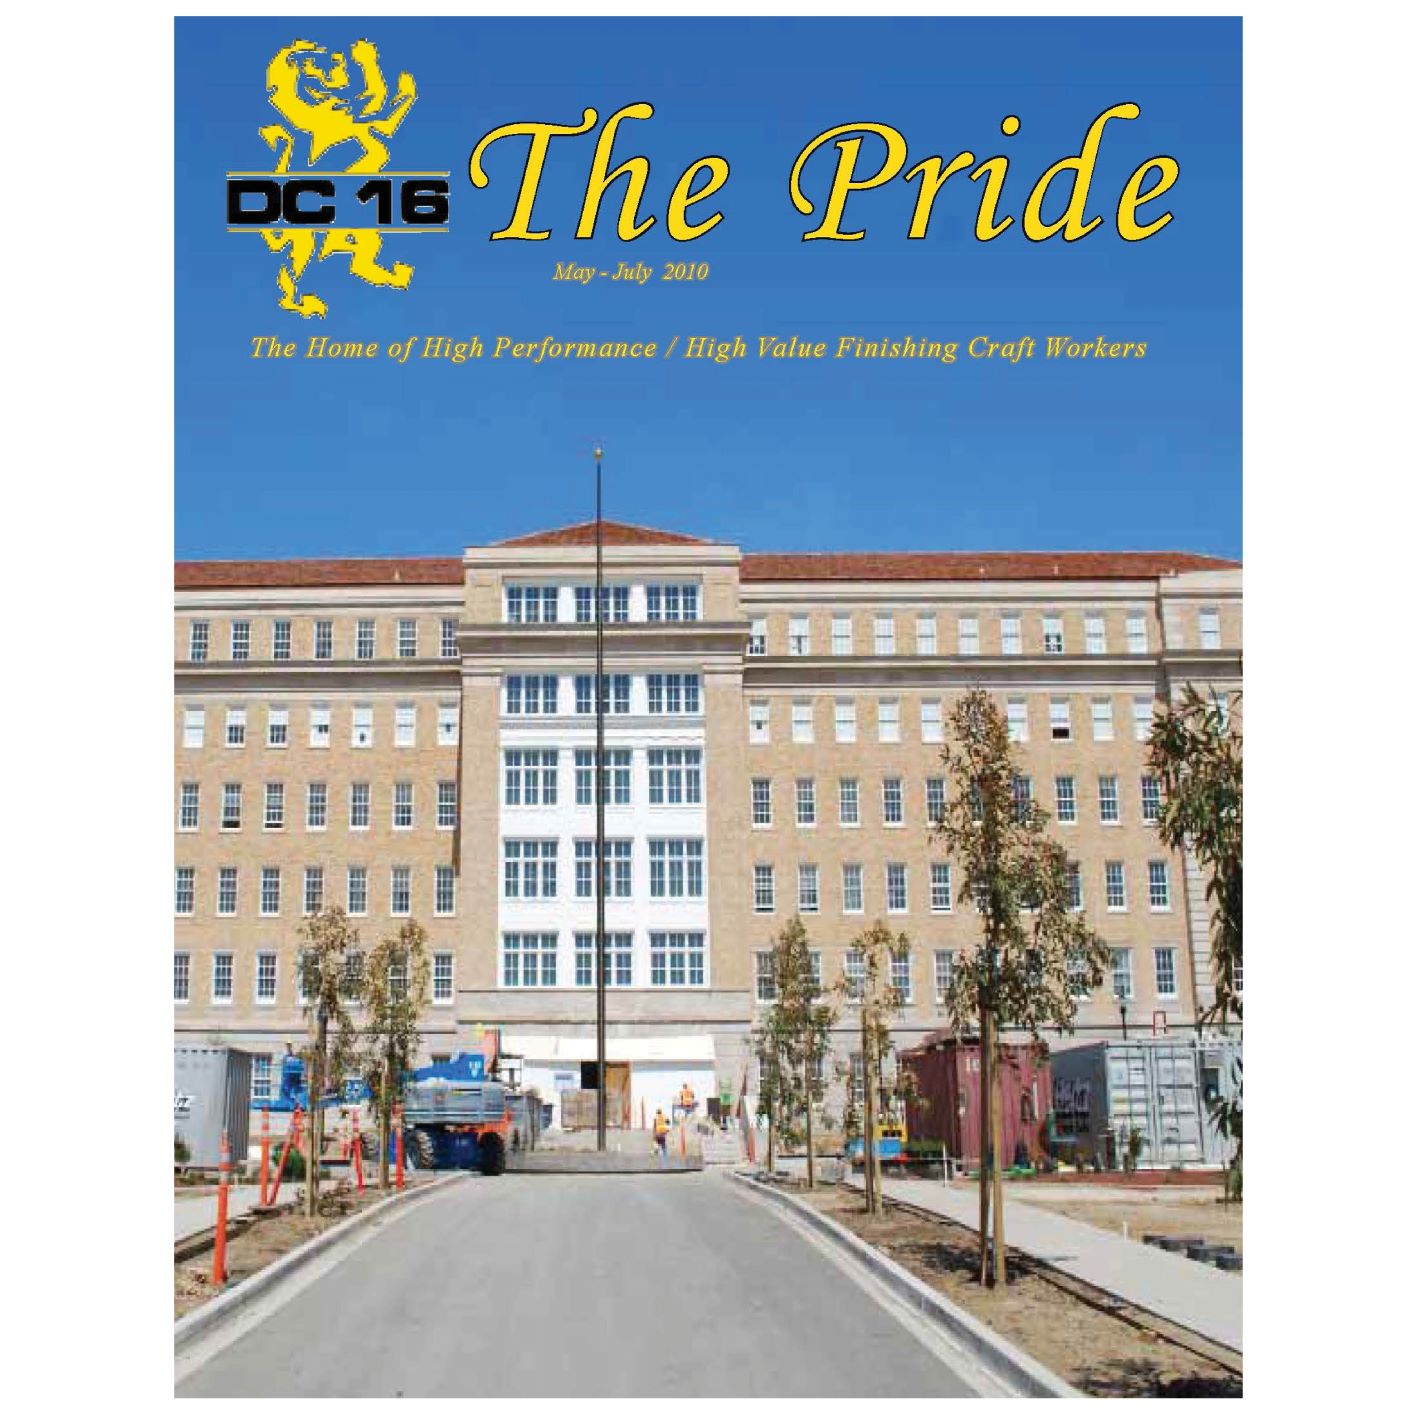 Image from the Gallery: The Pride May – July 2010